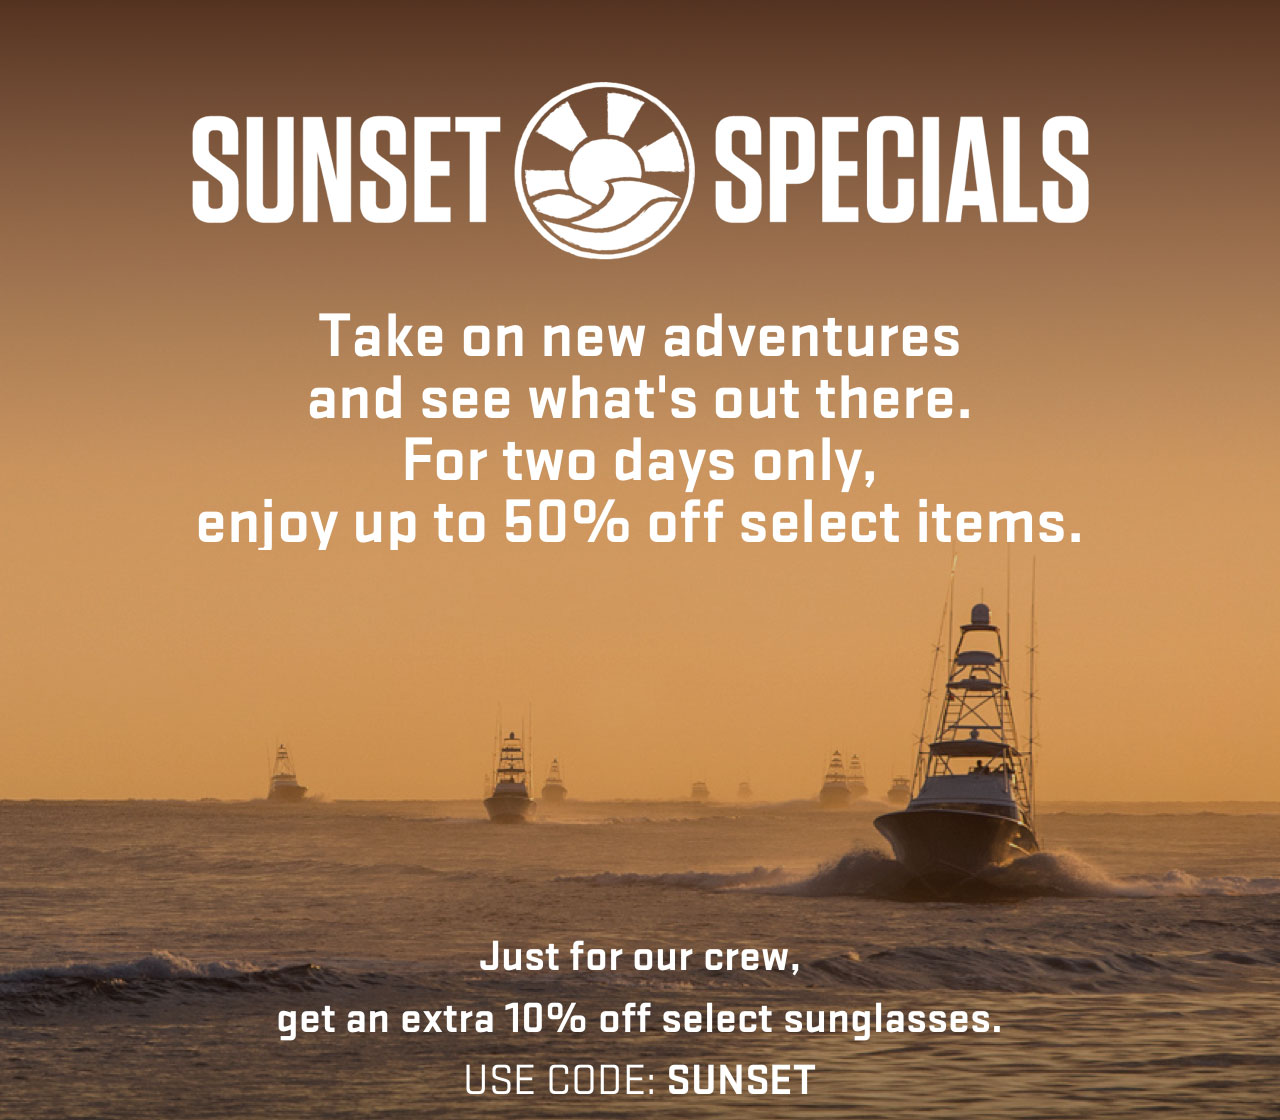 

SUNSET SPECIALS

Take on new adventures
and see what''s out there.
For two days only,
enjoy up to 50% off select items.

Just for our crew,
get an extra 10% off select sunglasses.
USE CODE: SUNSET

									